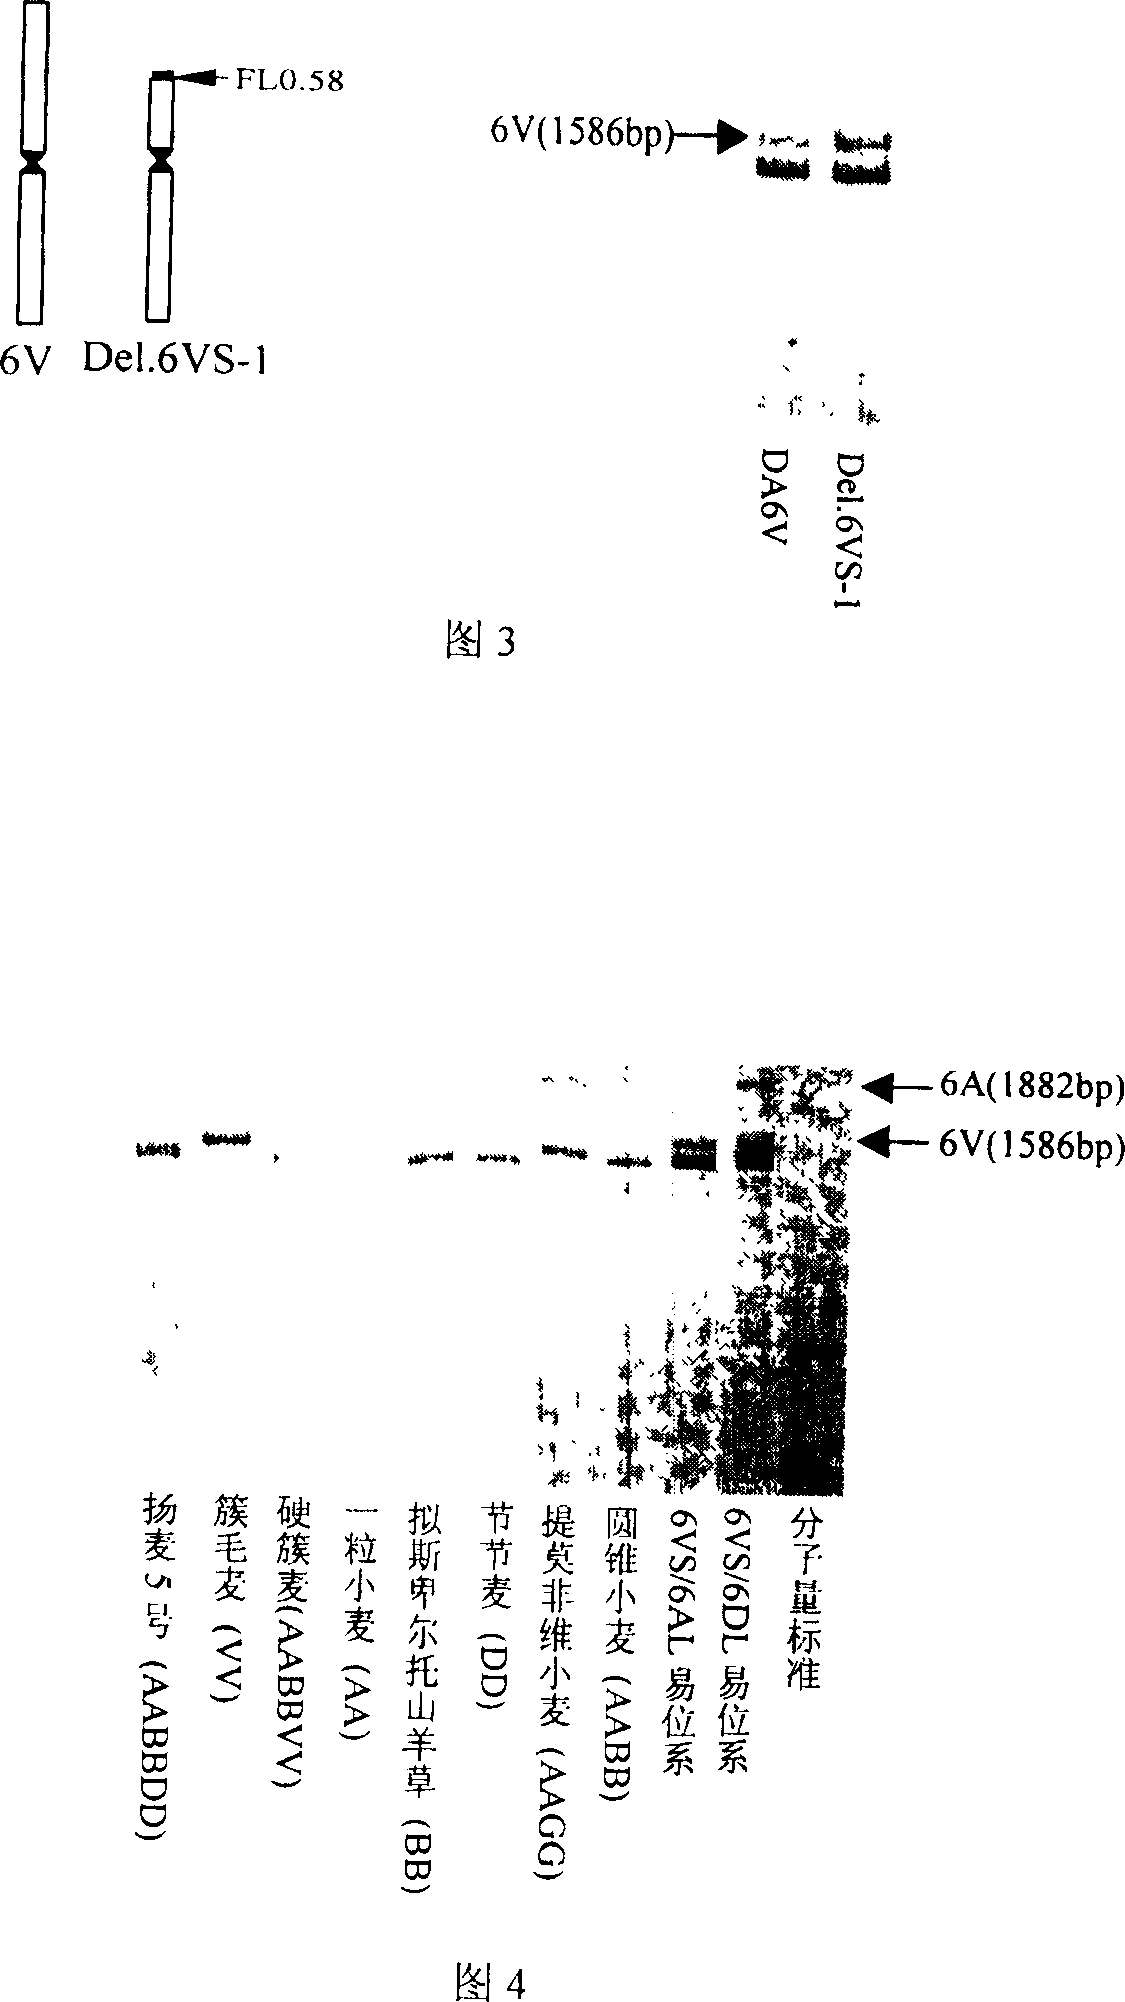 Wheat anti-powdery mildew gene Pm21 linked codorminant PCR marker and its usage